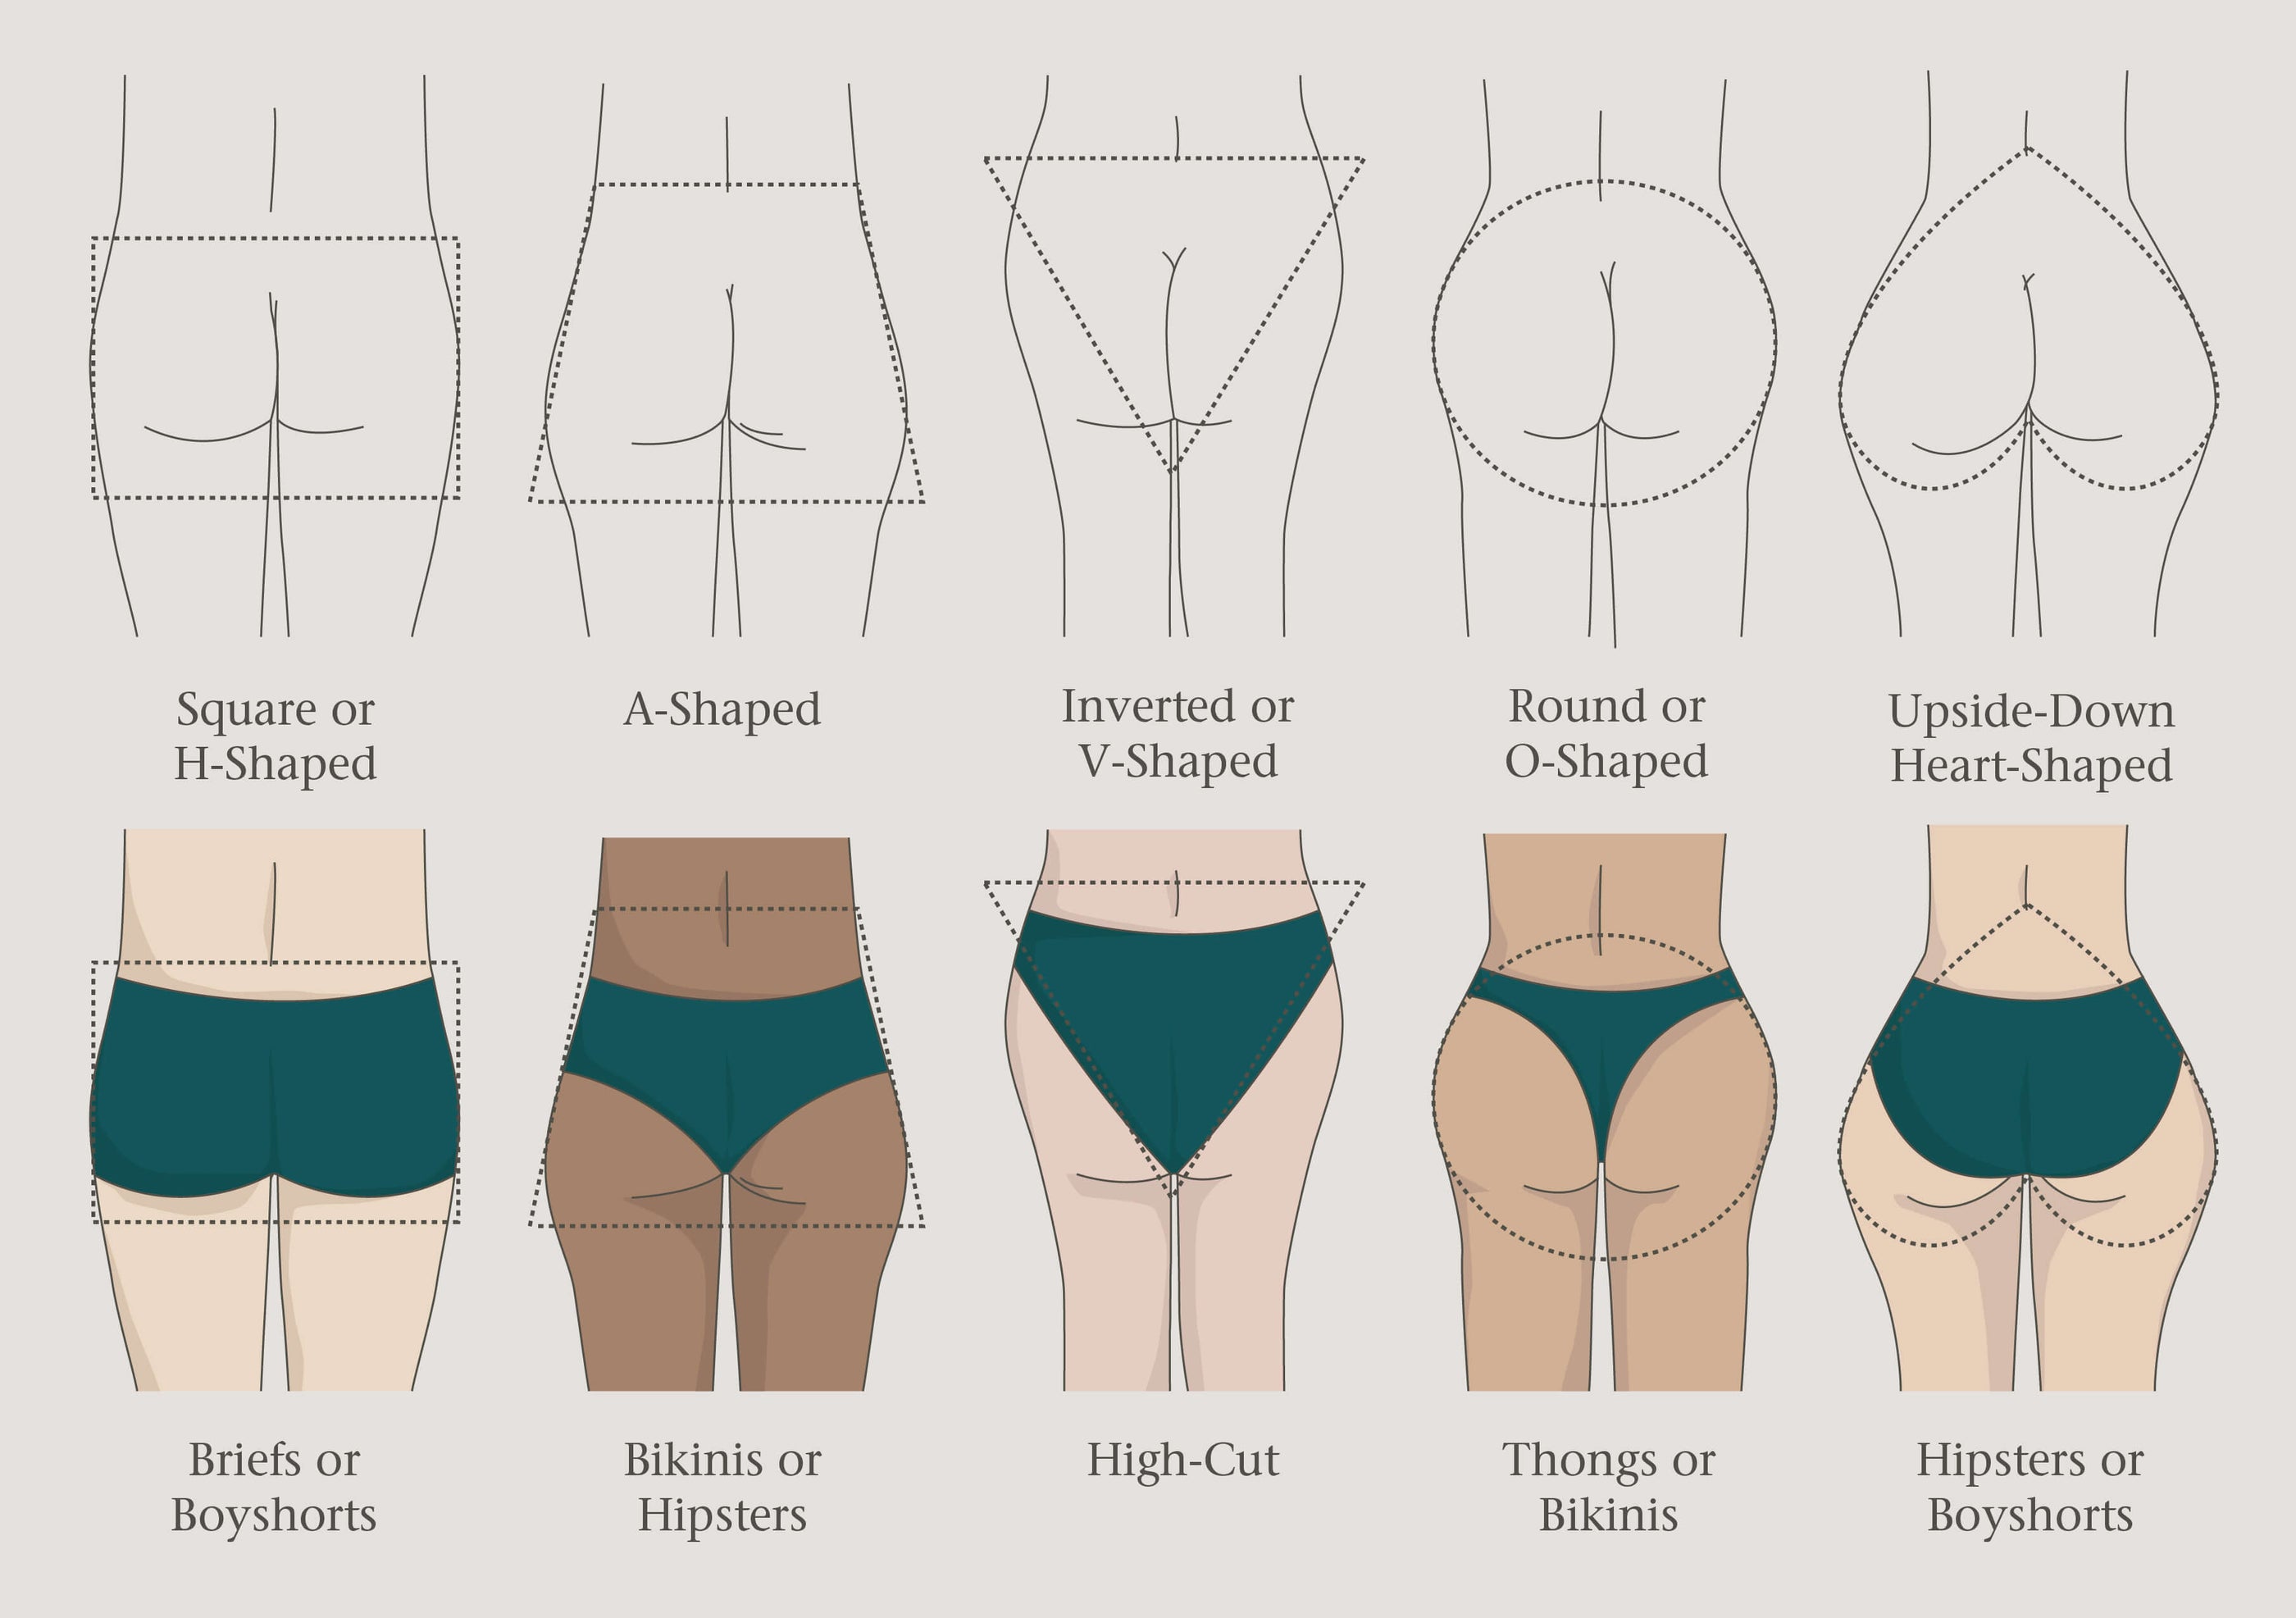 The Best Underwear For The Most Common Body Issues